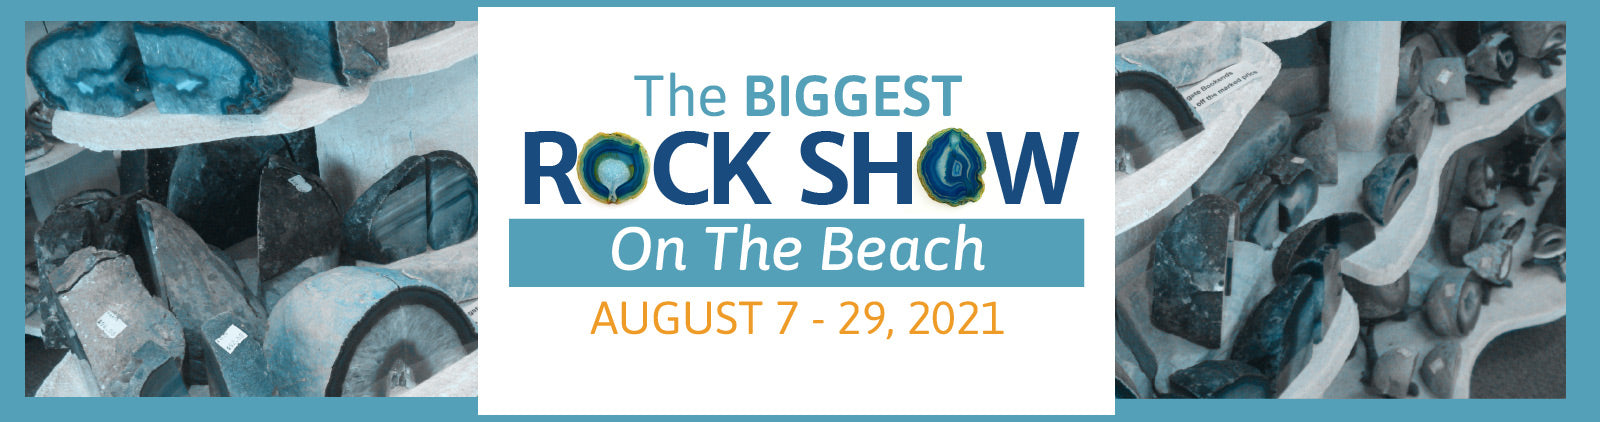 The Biggest Rock Show On The Beach